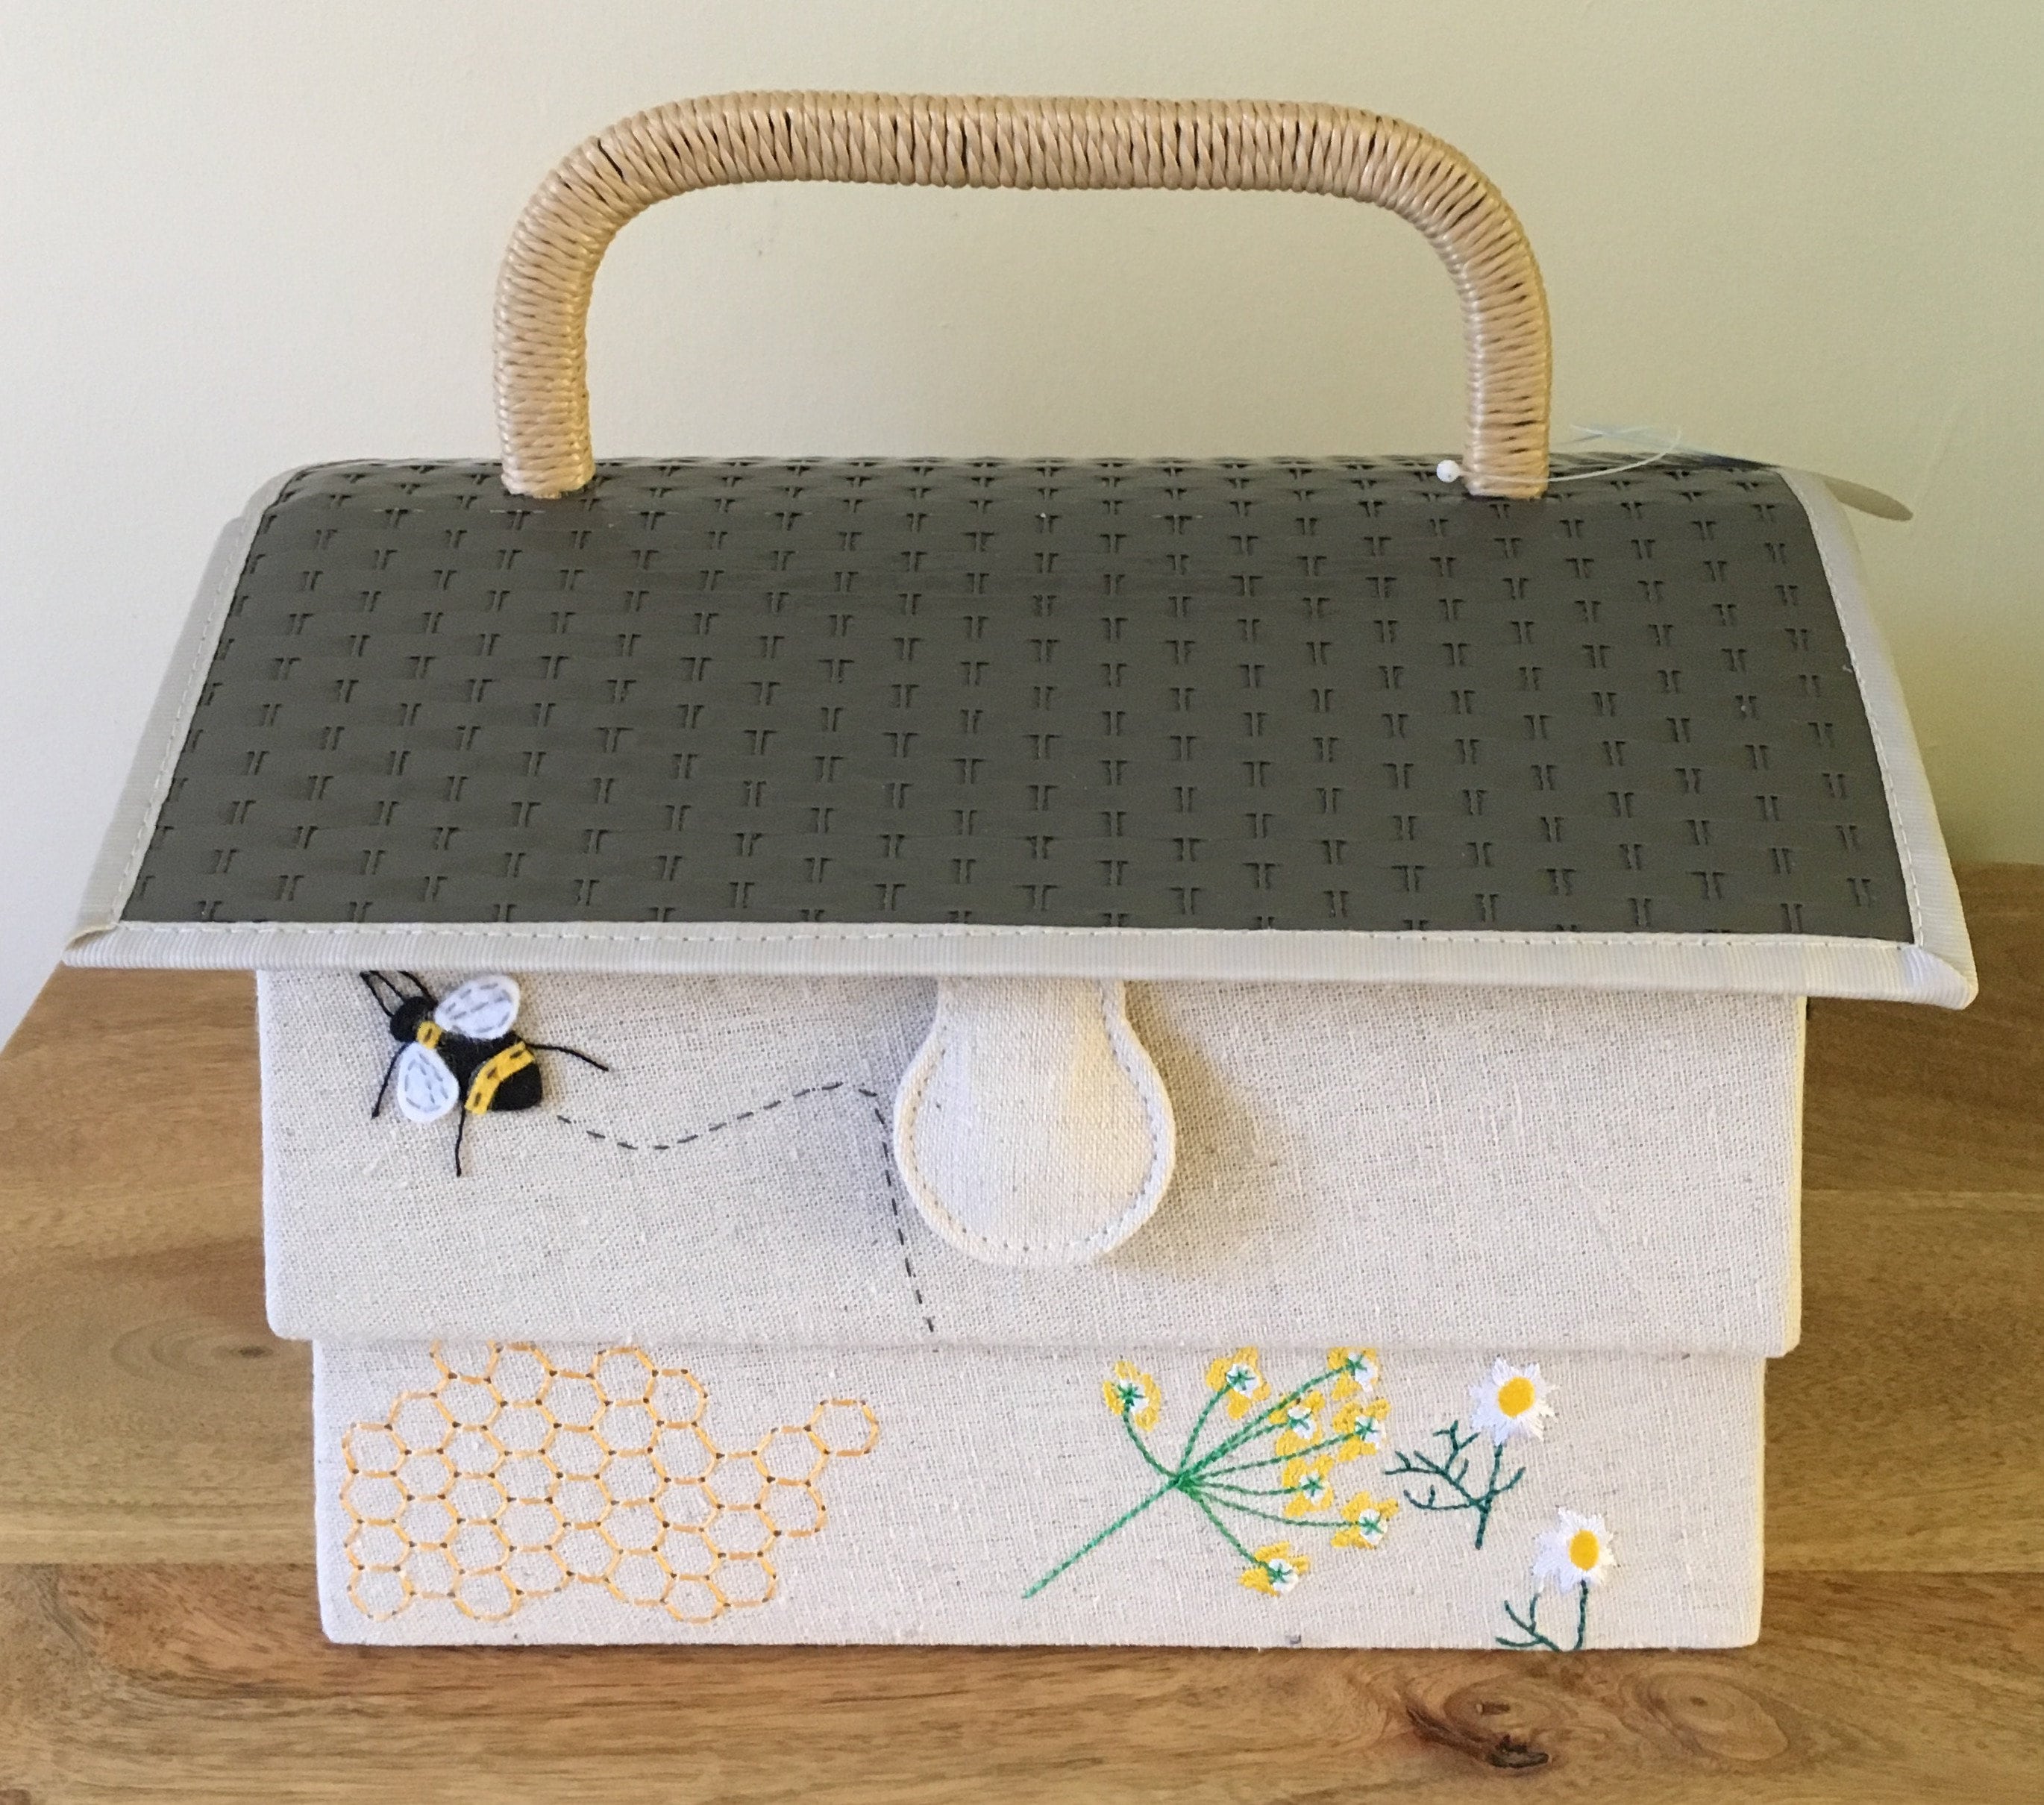 SEWING BASKET BOX FABULOUS BEE HIVE DESIGN LARGE SIZE SUPER QUALITY 